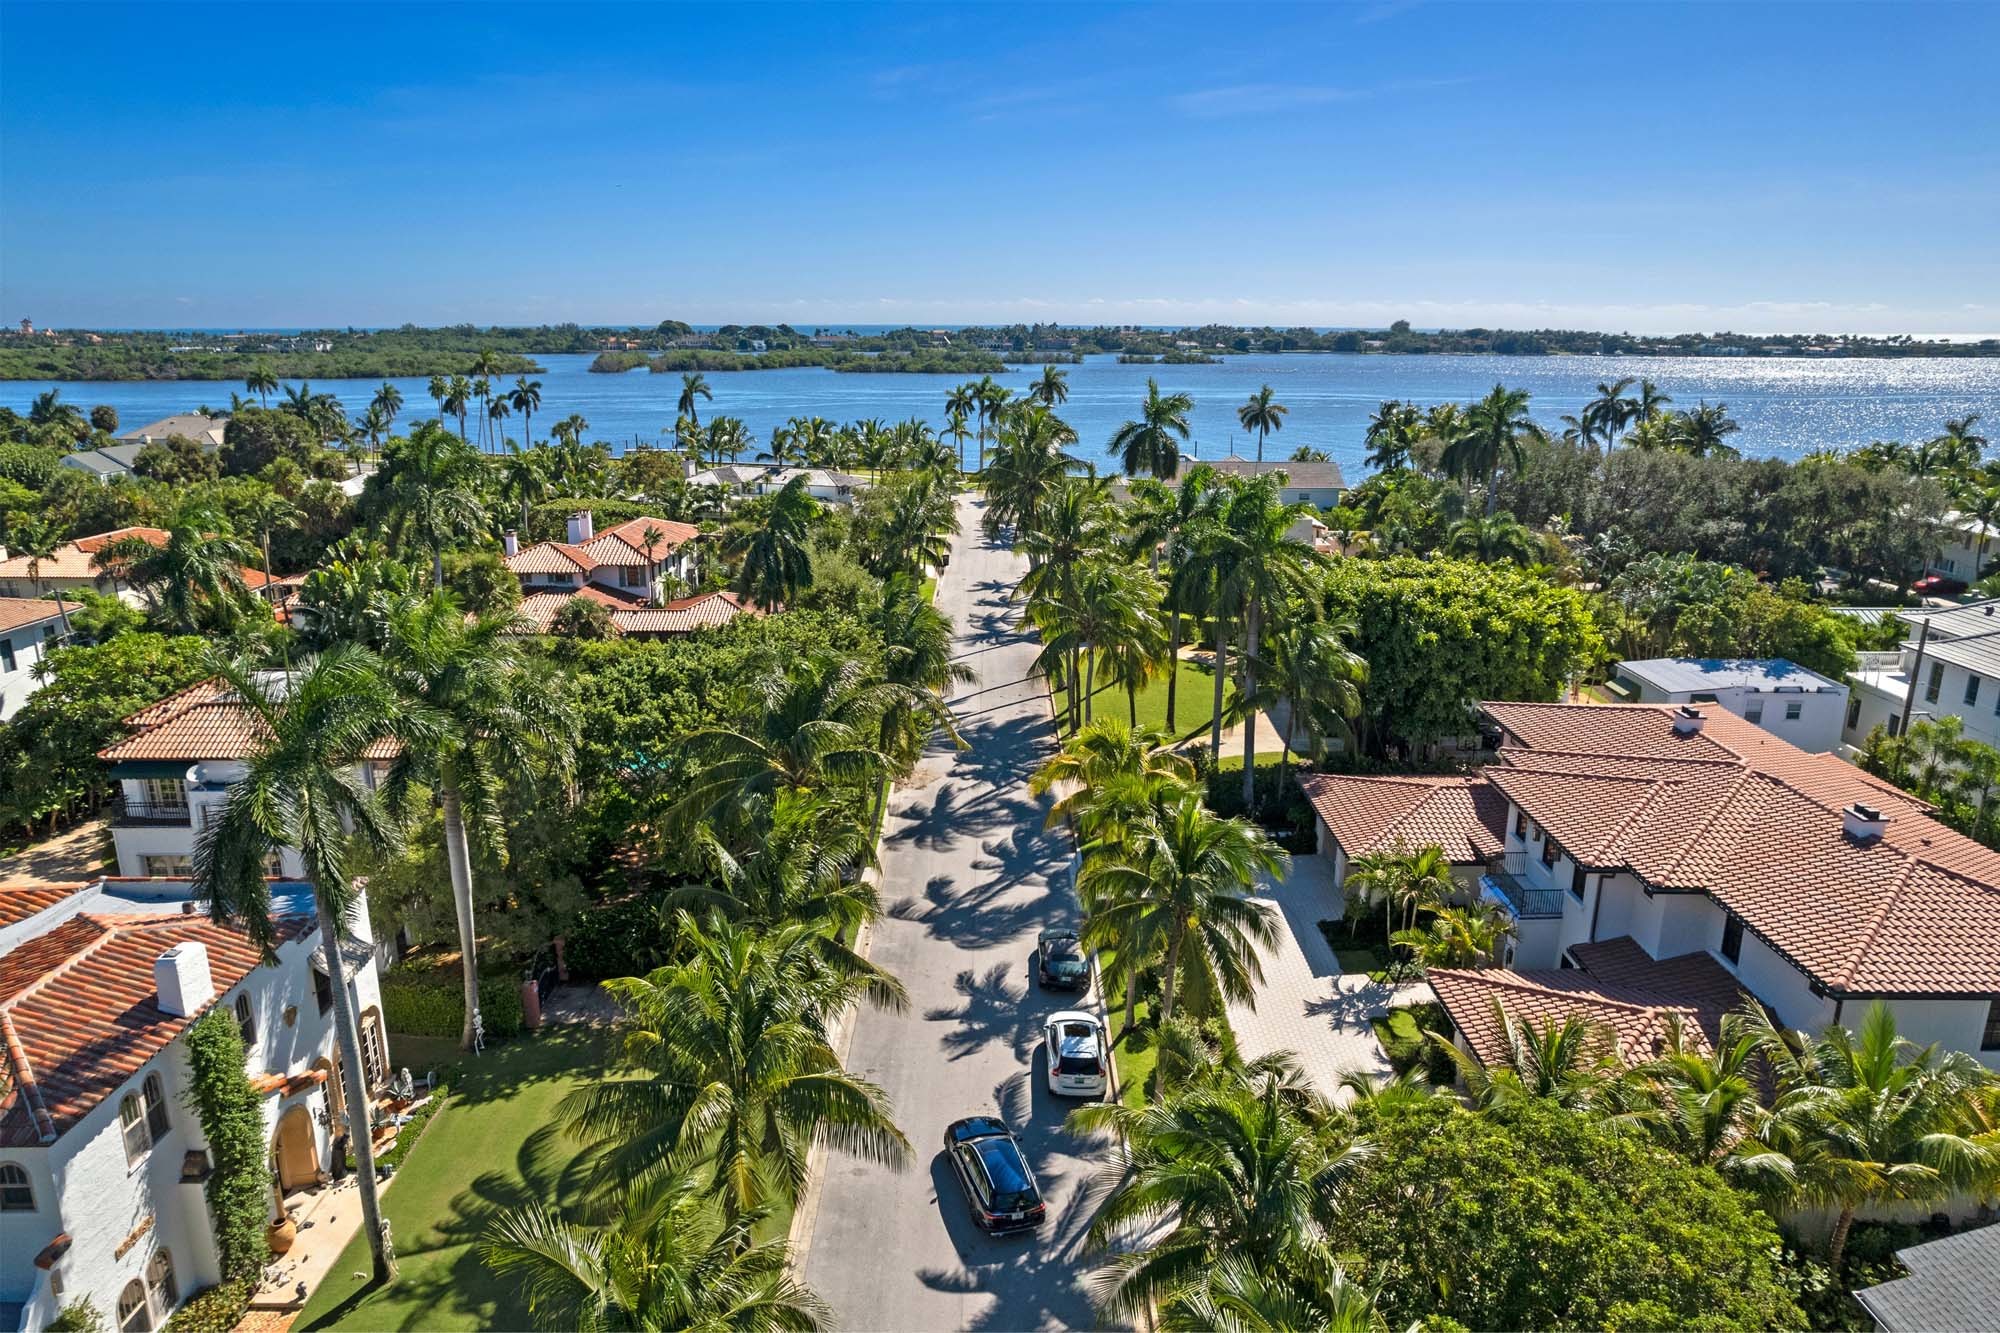 The Southend West Palm Beach | Homes for Sale in Soso West Palm Beach